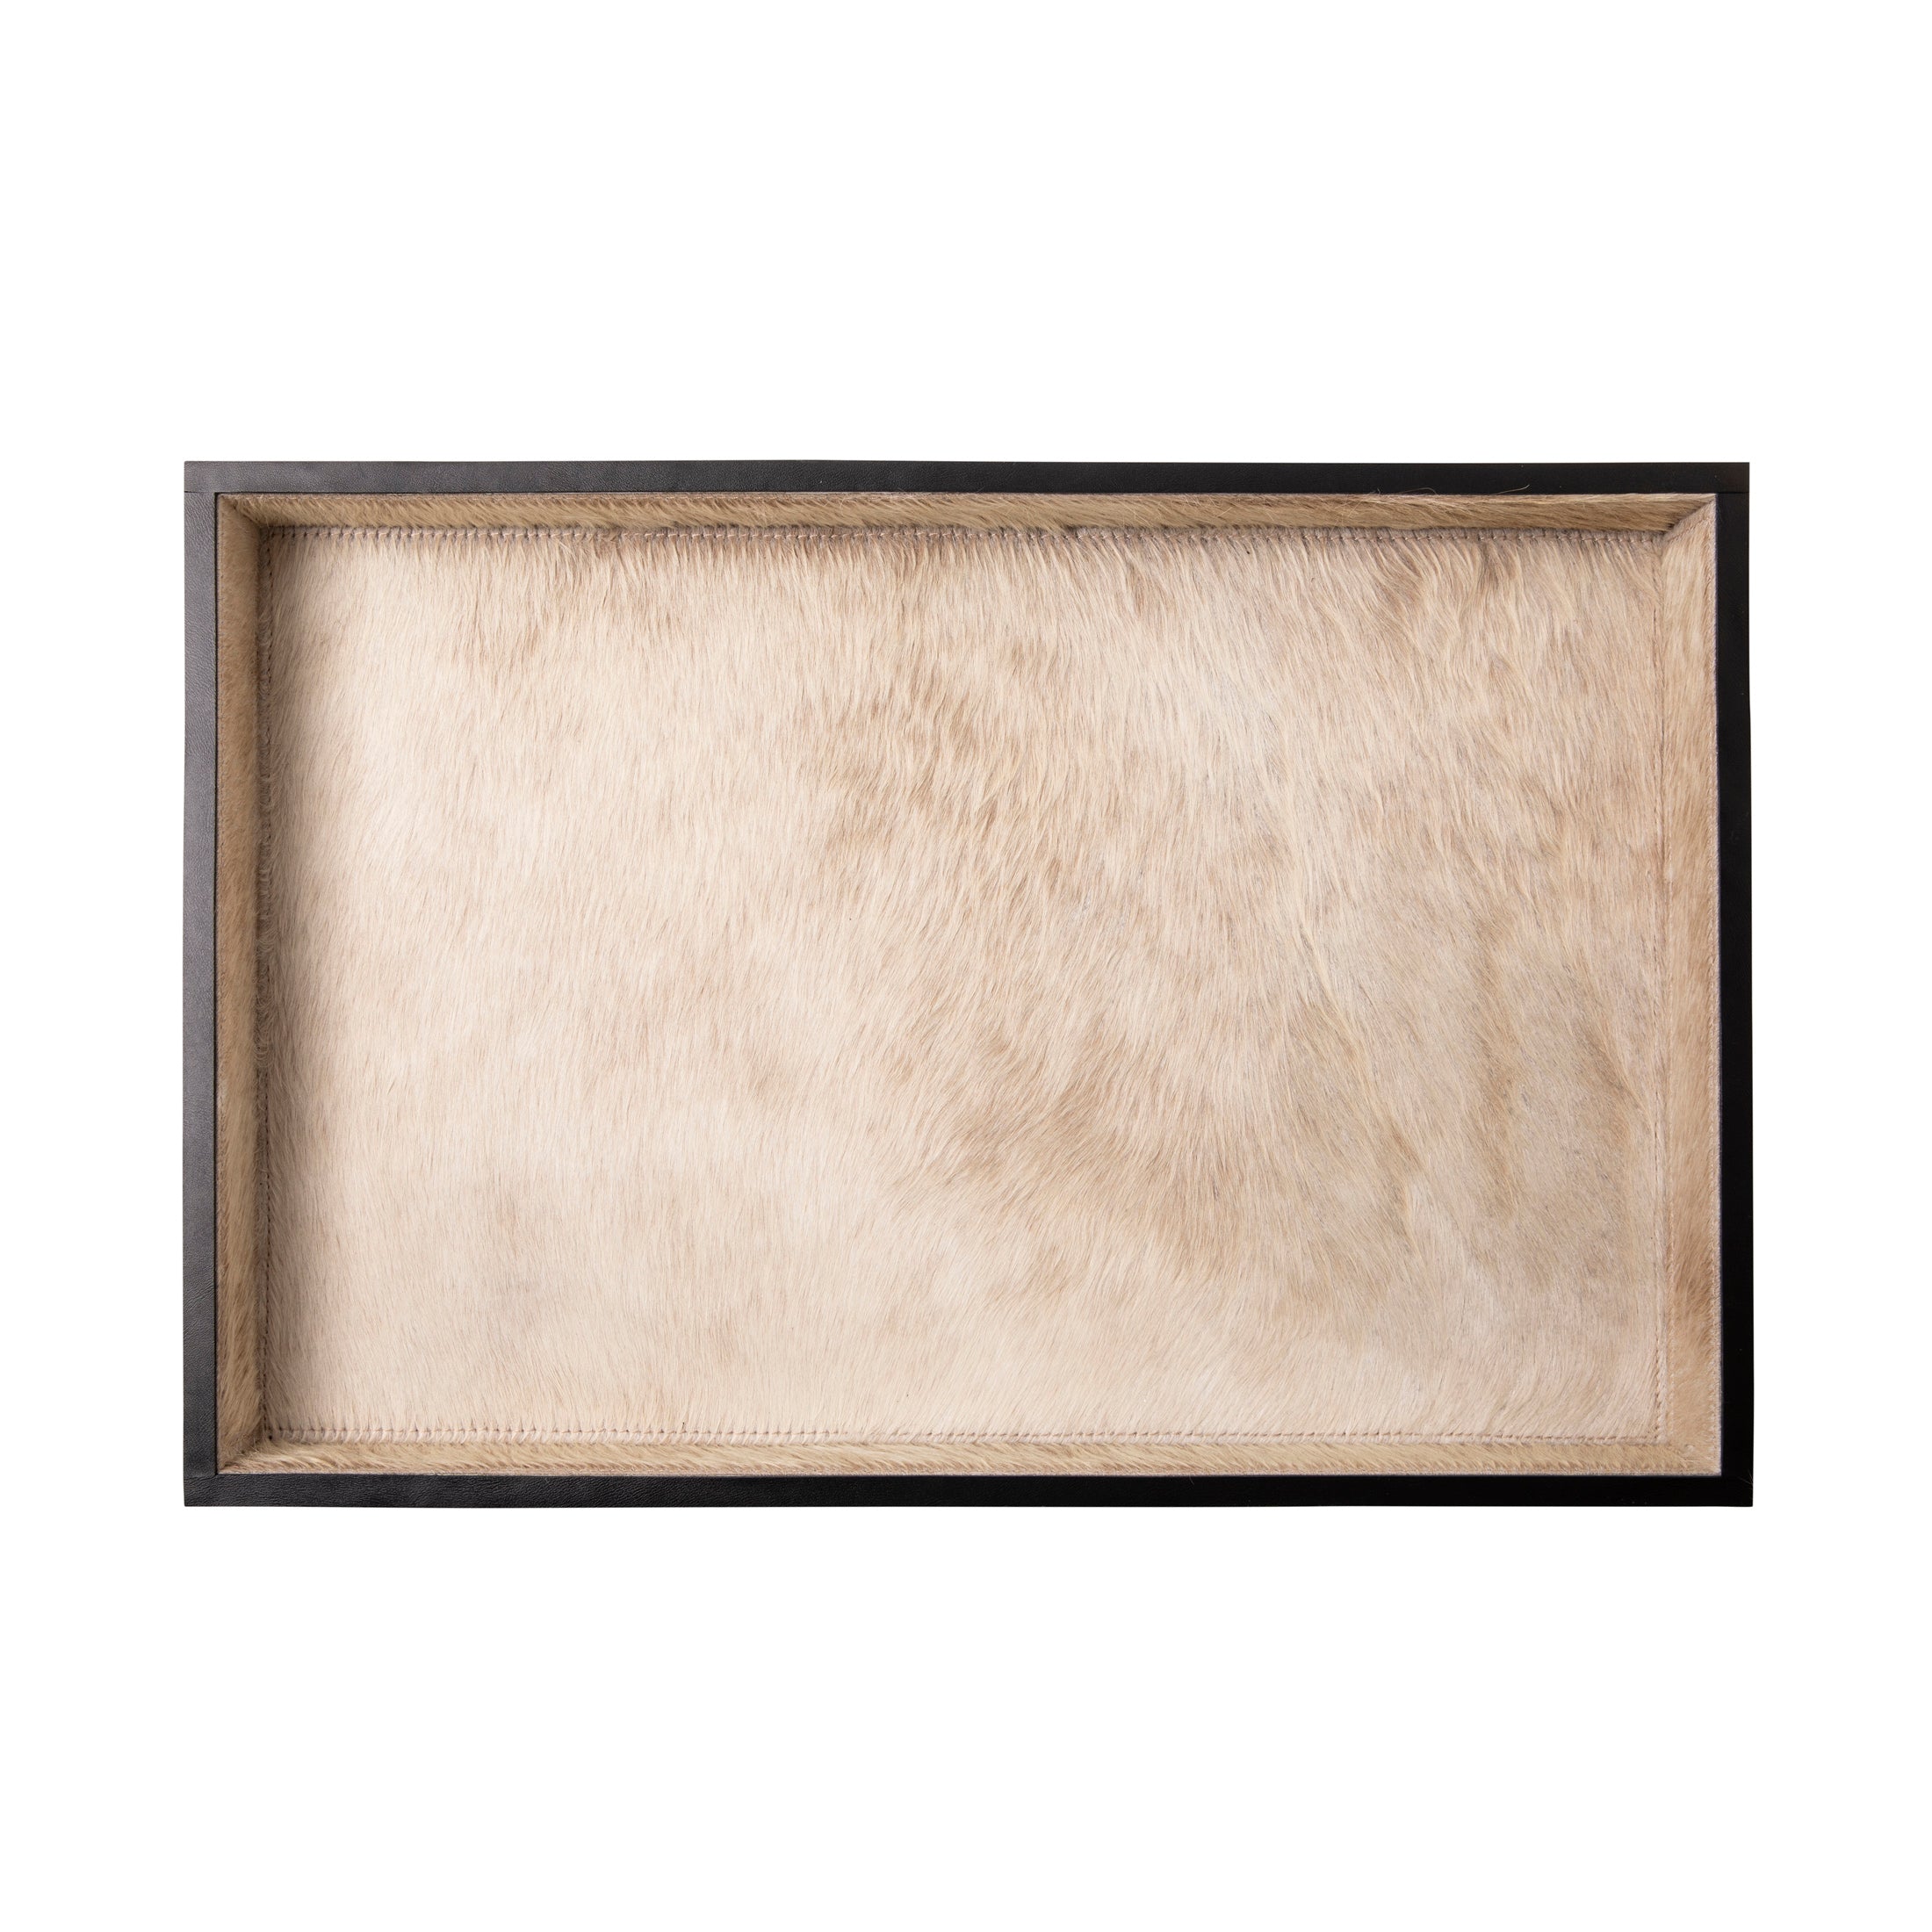 Cream Cow Hide Rectangle Tray with Black Leather Trim - Large